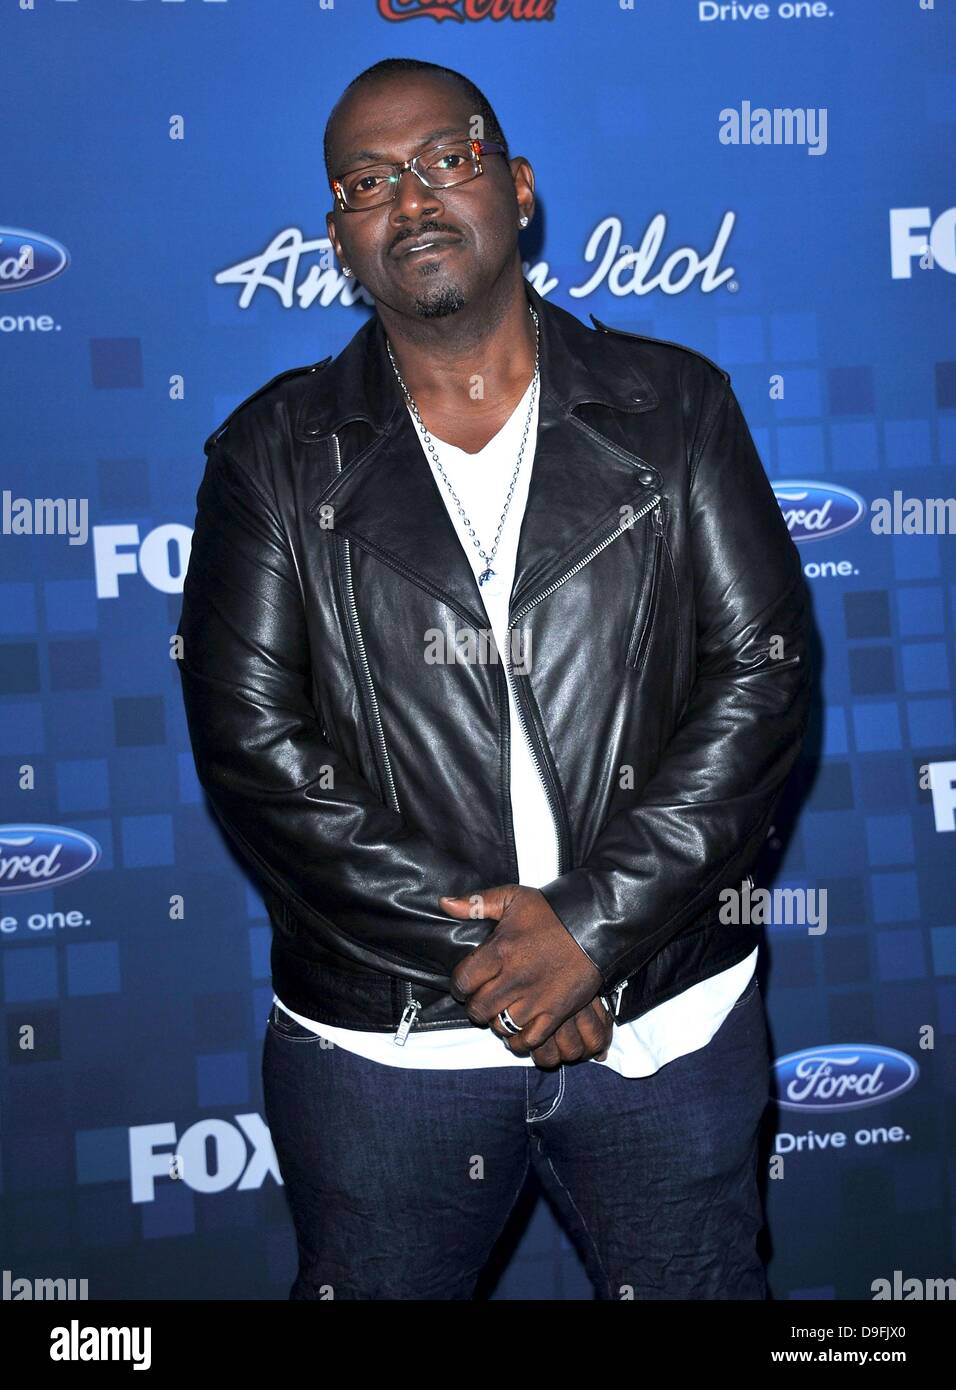 Randy Jackson The American Idol Season 10 Top 13 Finalists Party held at the Grove rooftop Los Angeles, California - 03.03.11 Stock Photo